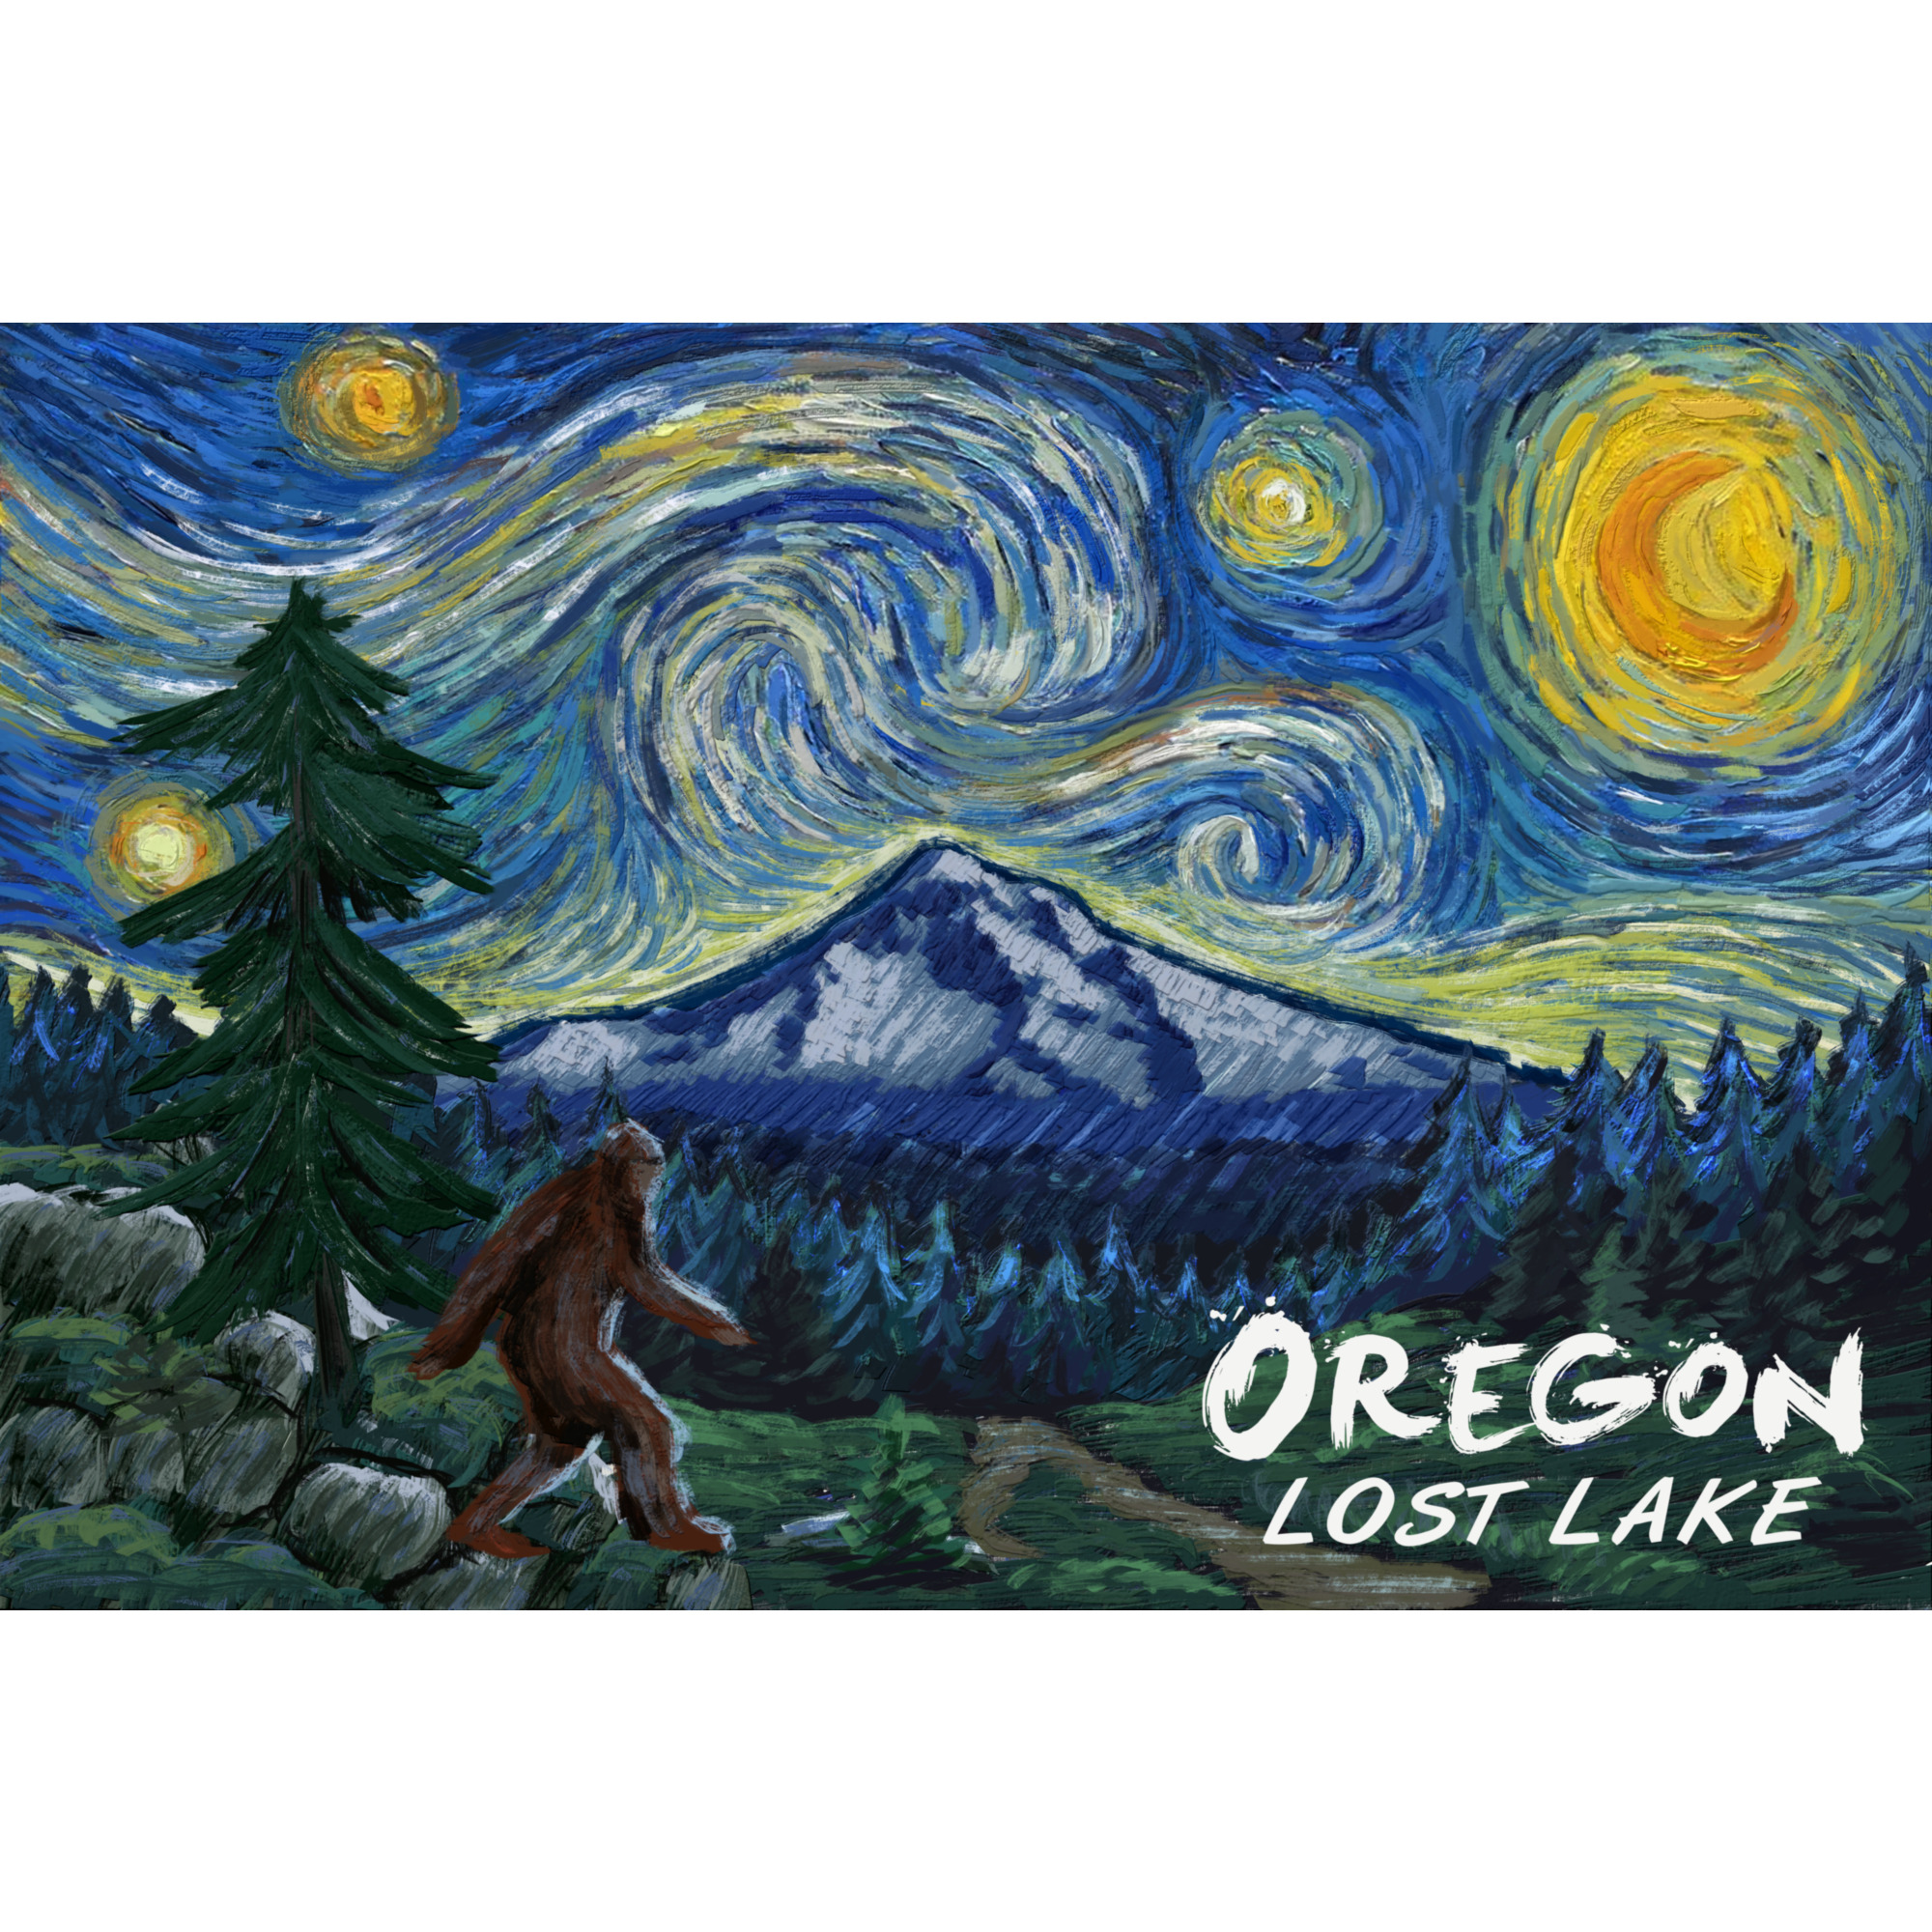 Lost Lake, Oregon, Bigfoot, Mt Hood, Starry Night (1000 Piece Puzzle, Size 19x27, Challenging Jigsaw Puzzle for Adults and Family, Made in USA) - image 4 of 4